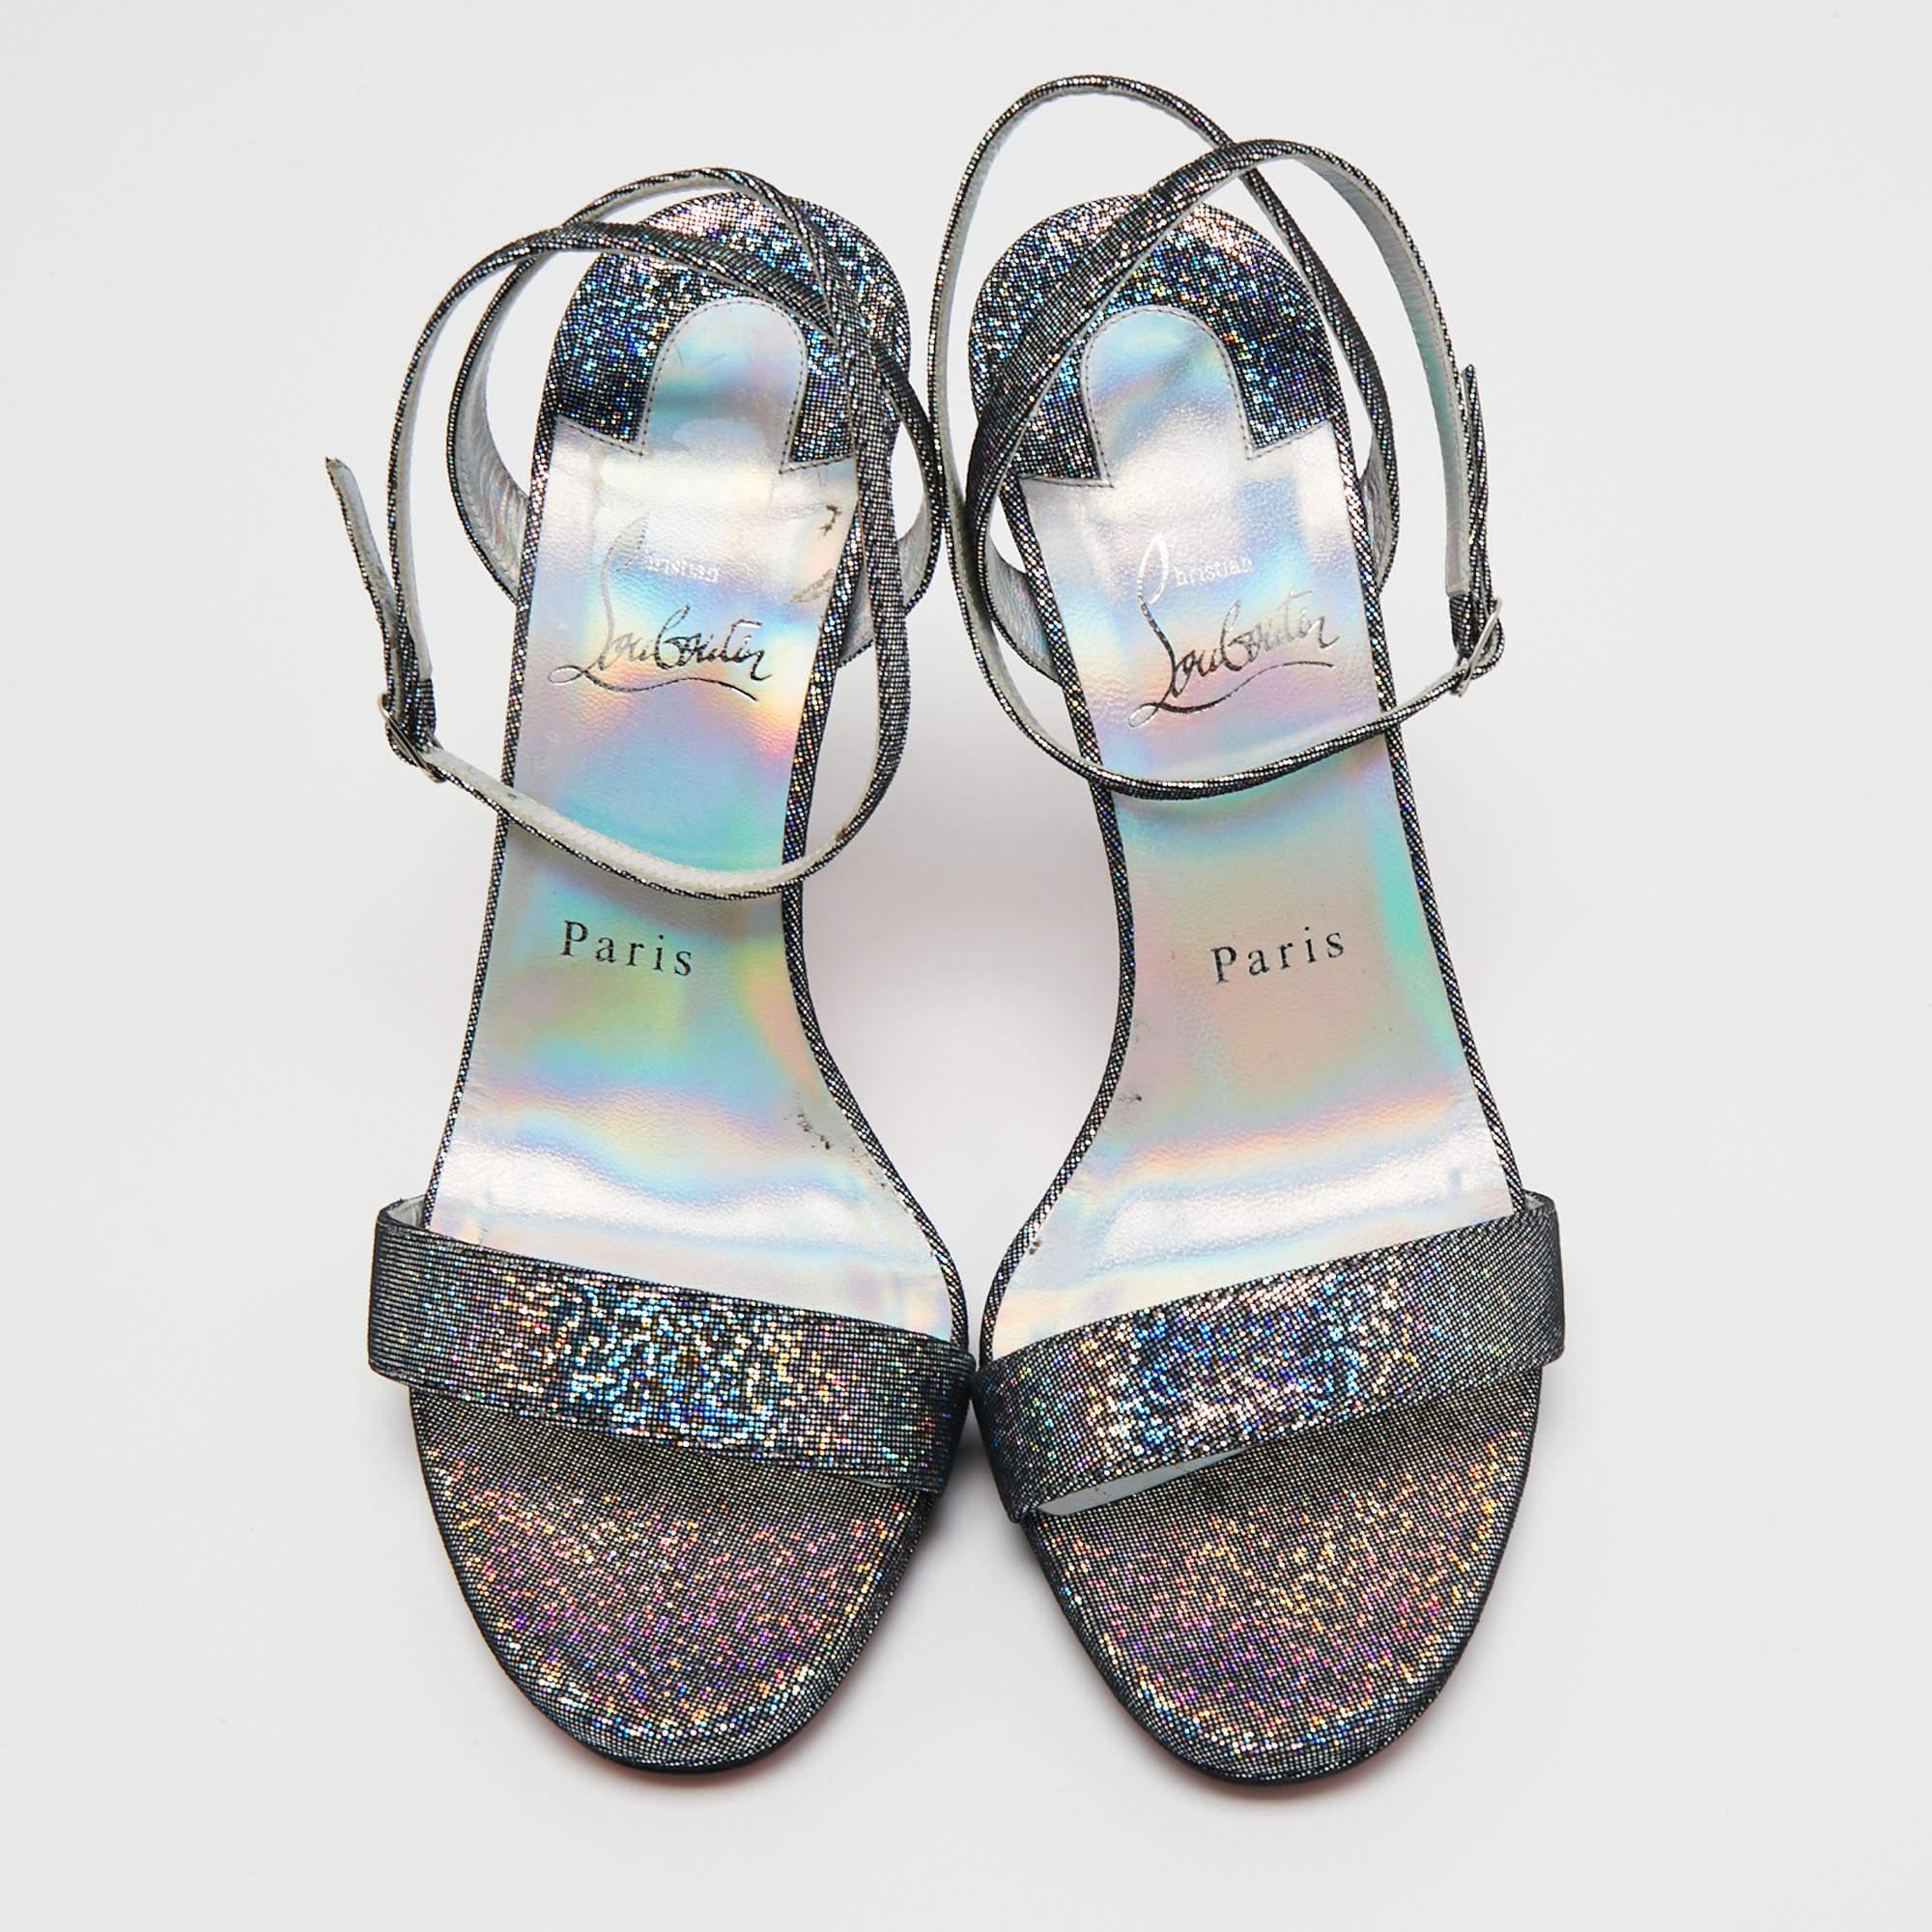 To perfectly complement your party outfits, Christian Louboutin brings you this pair of sandals that speak nothing but high fashion. They've been crafted from multicolored glitter and are detailed with buckled ankle straps. The 12 cm heels are just